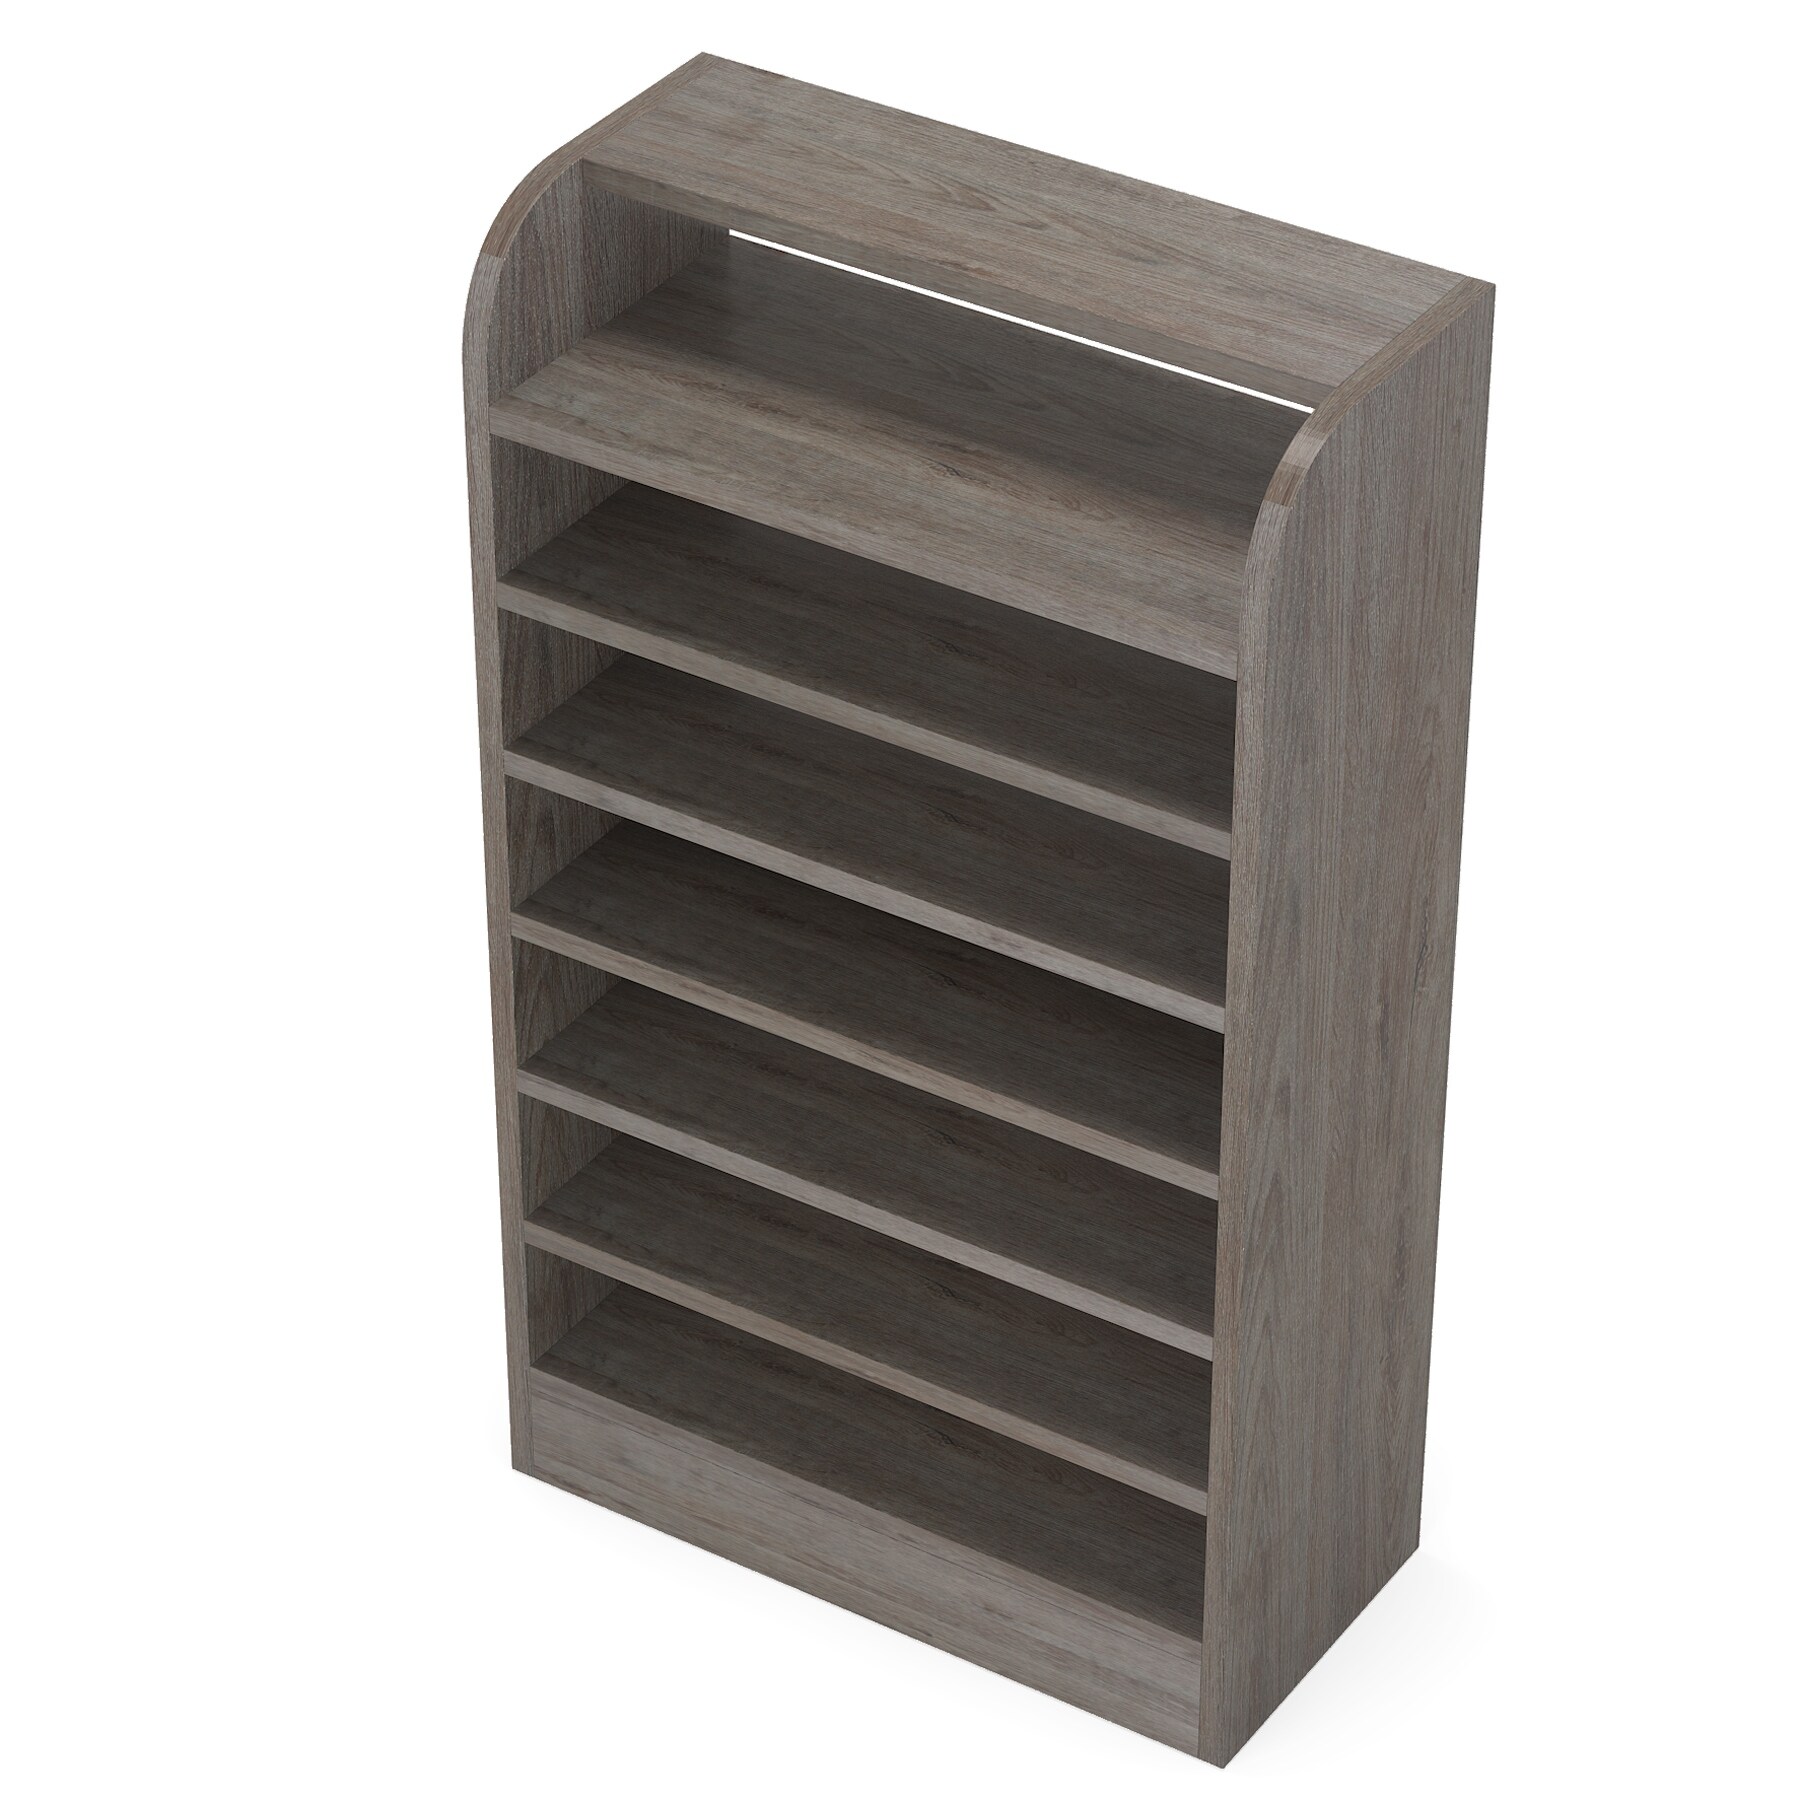 https://ak1.ostkcdn.com/images/products/is/images/direct/cce5f4416bcd966de71895e42fc29362eb37f866/8-Tier-Shoe-Cabinet-for-Entryway%2C21-Pairs-White-Shoe-Shelf-Shoes-Rack-Organizer.jpg